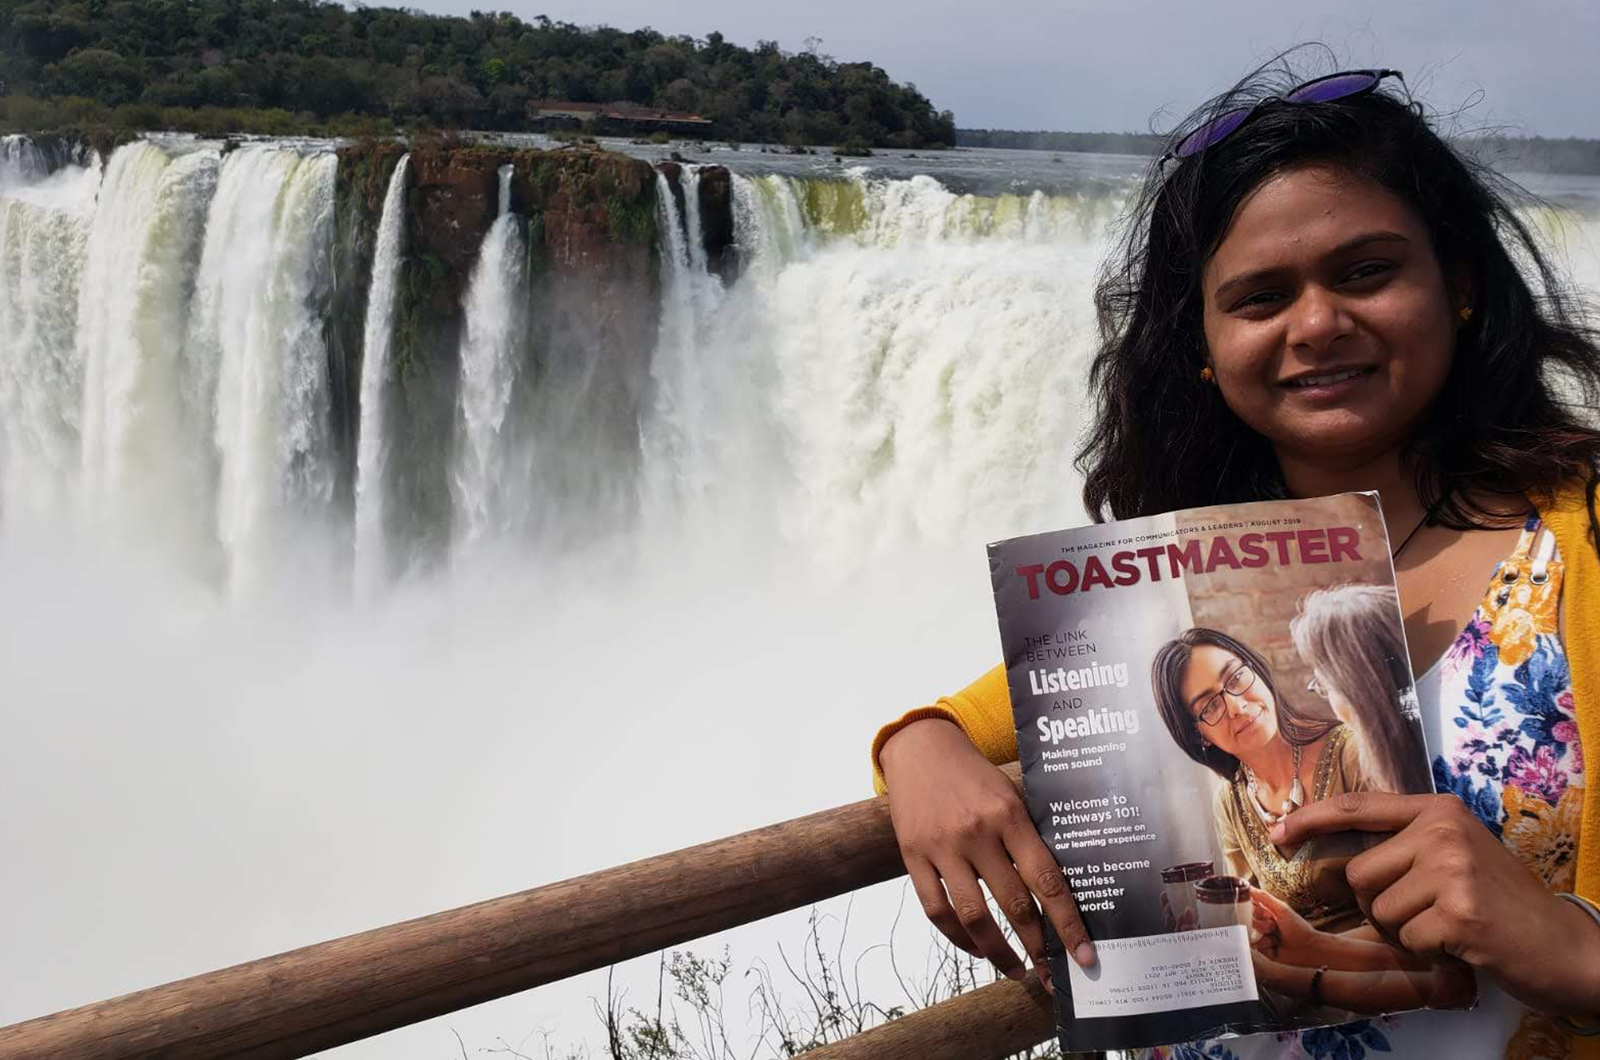 Monica Kenguva of Phoenix, Arizona, takes in the views at the Iguazu Falls in the province of Misiones, Argentina.